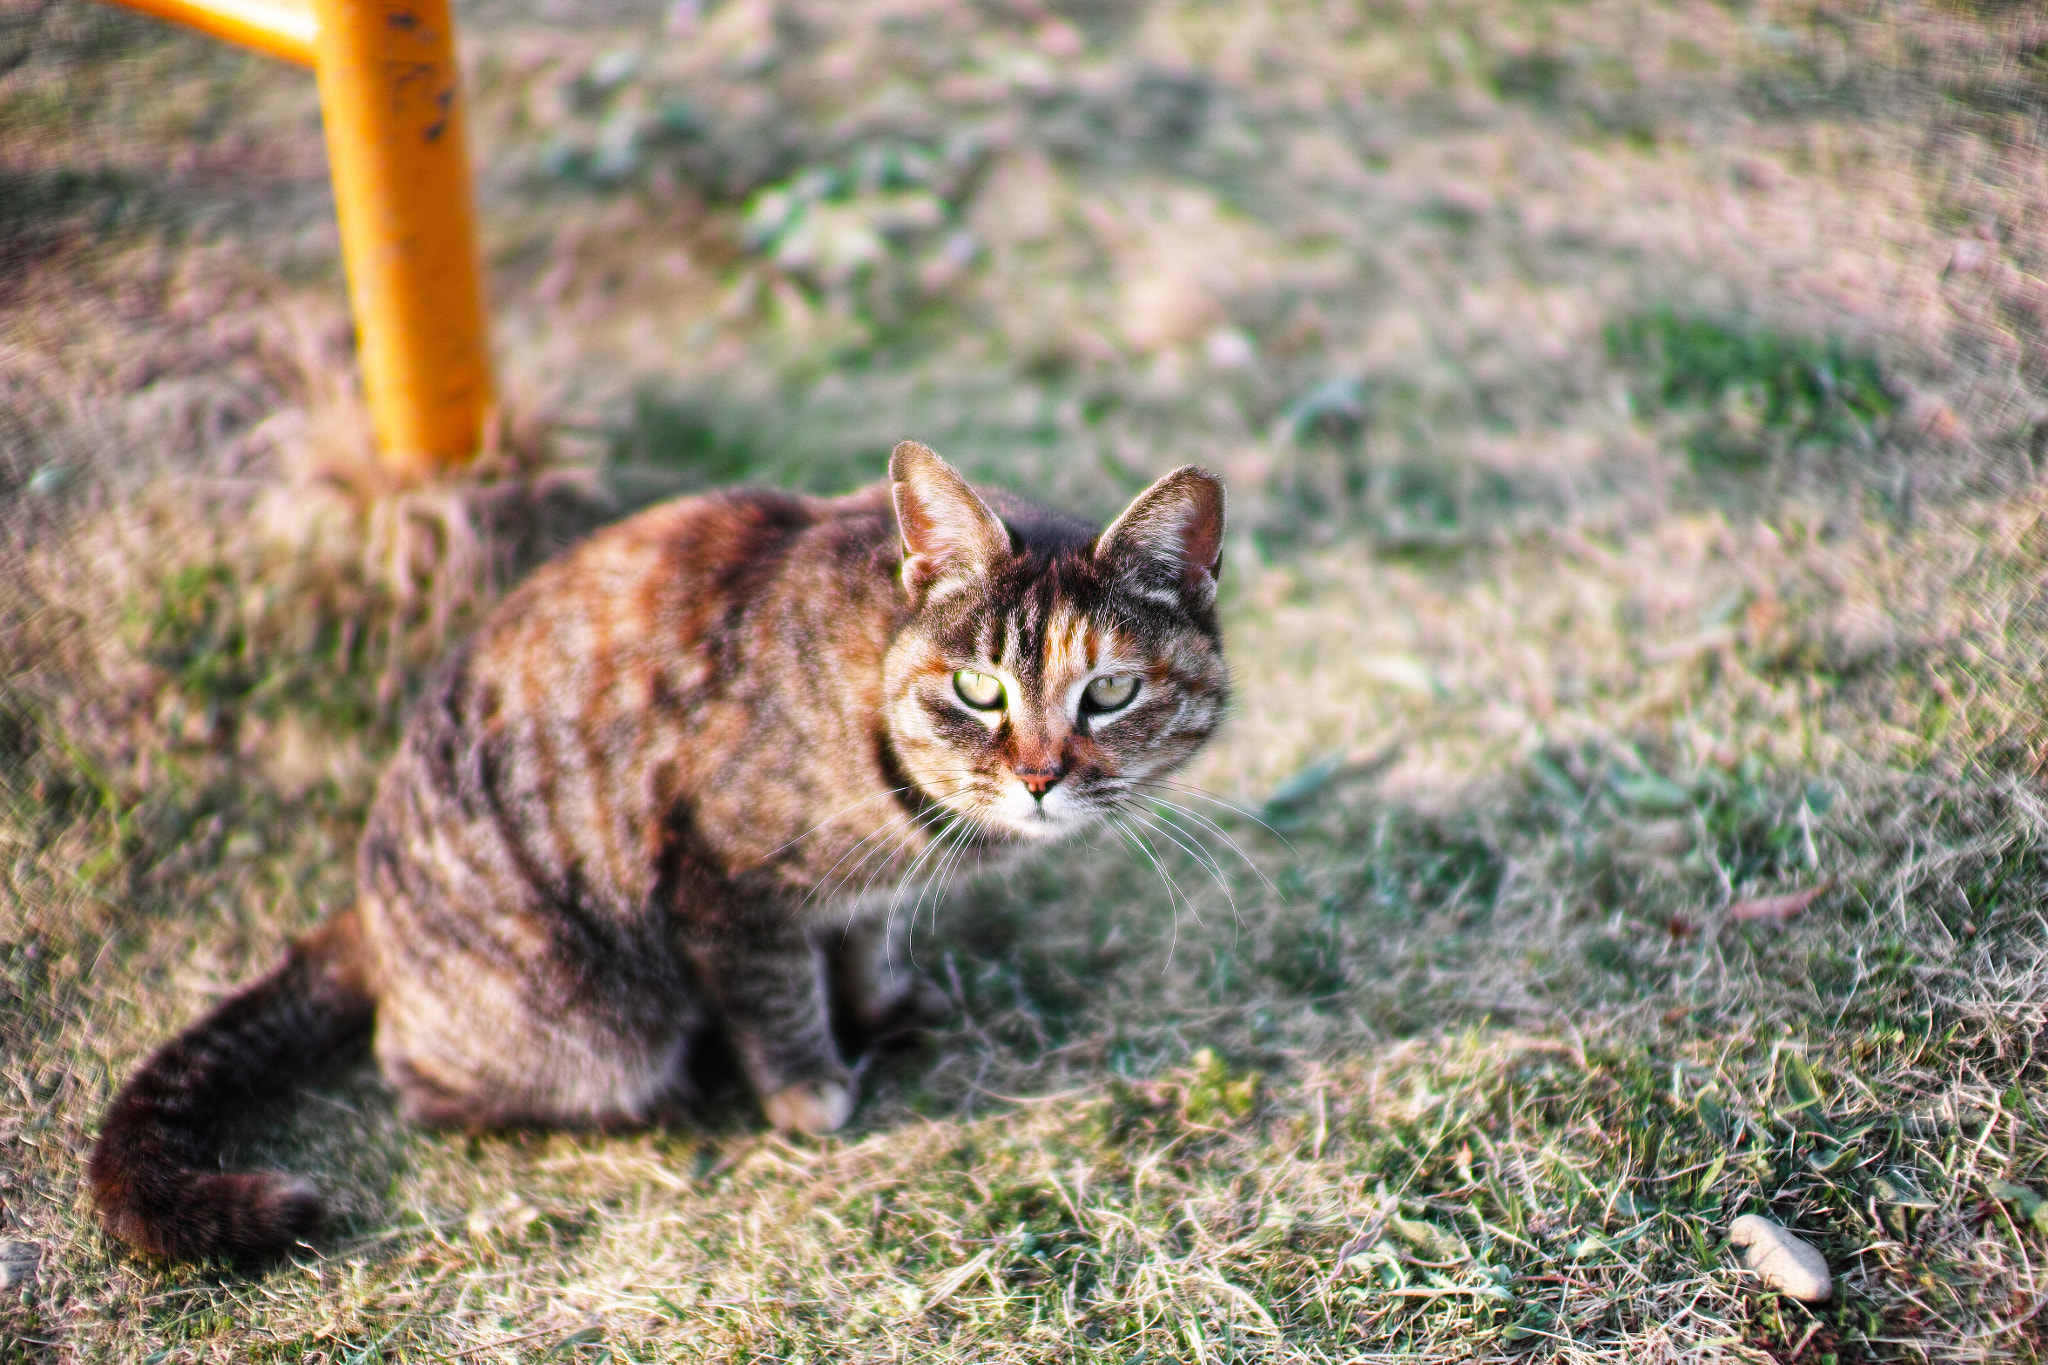 Sigma SD1 Merrill sample photo. Cat every day photography